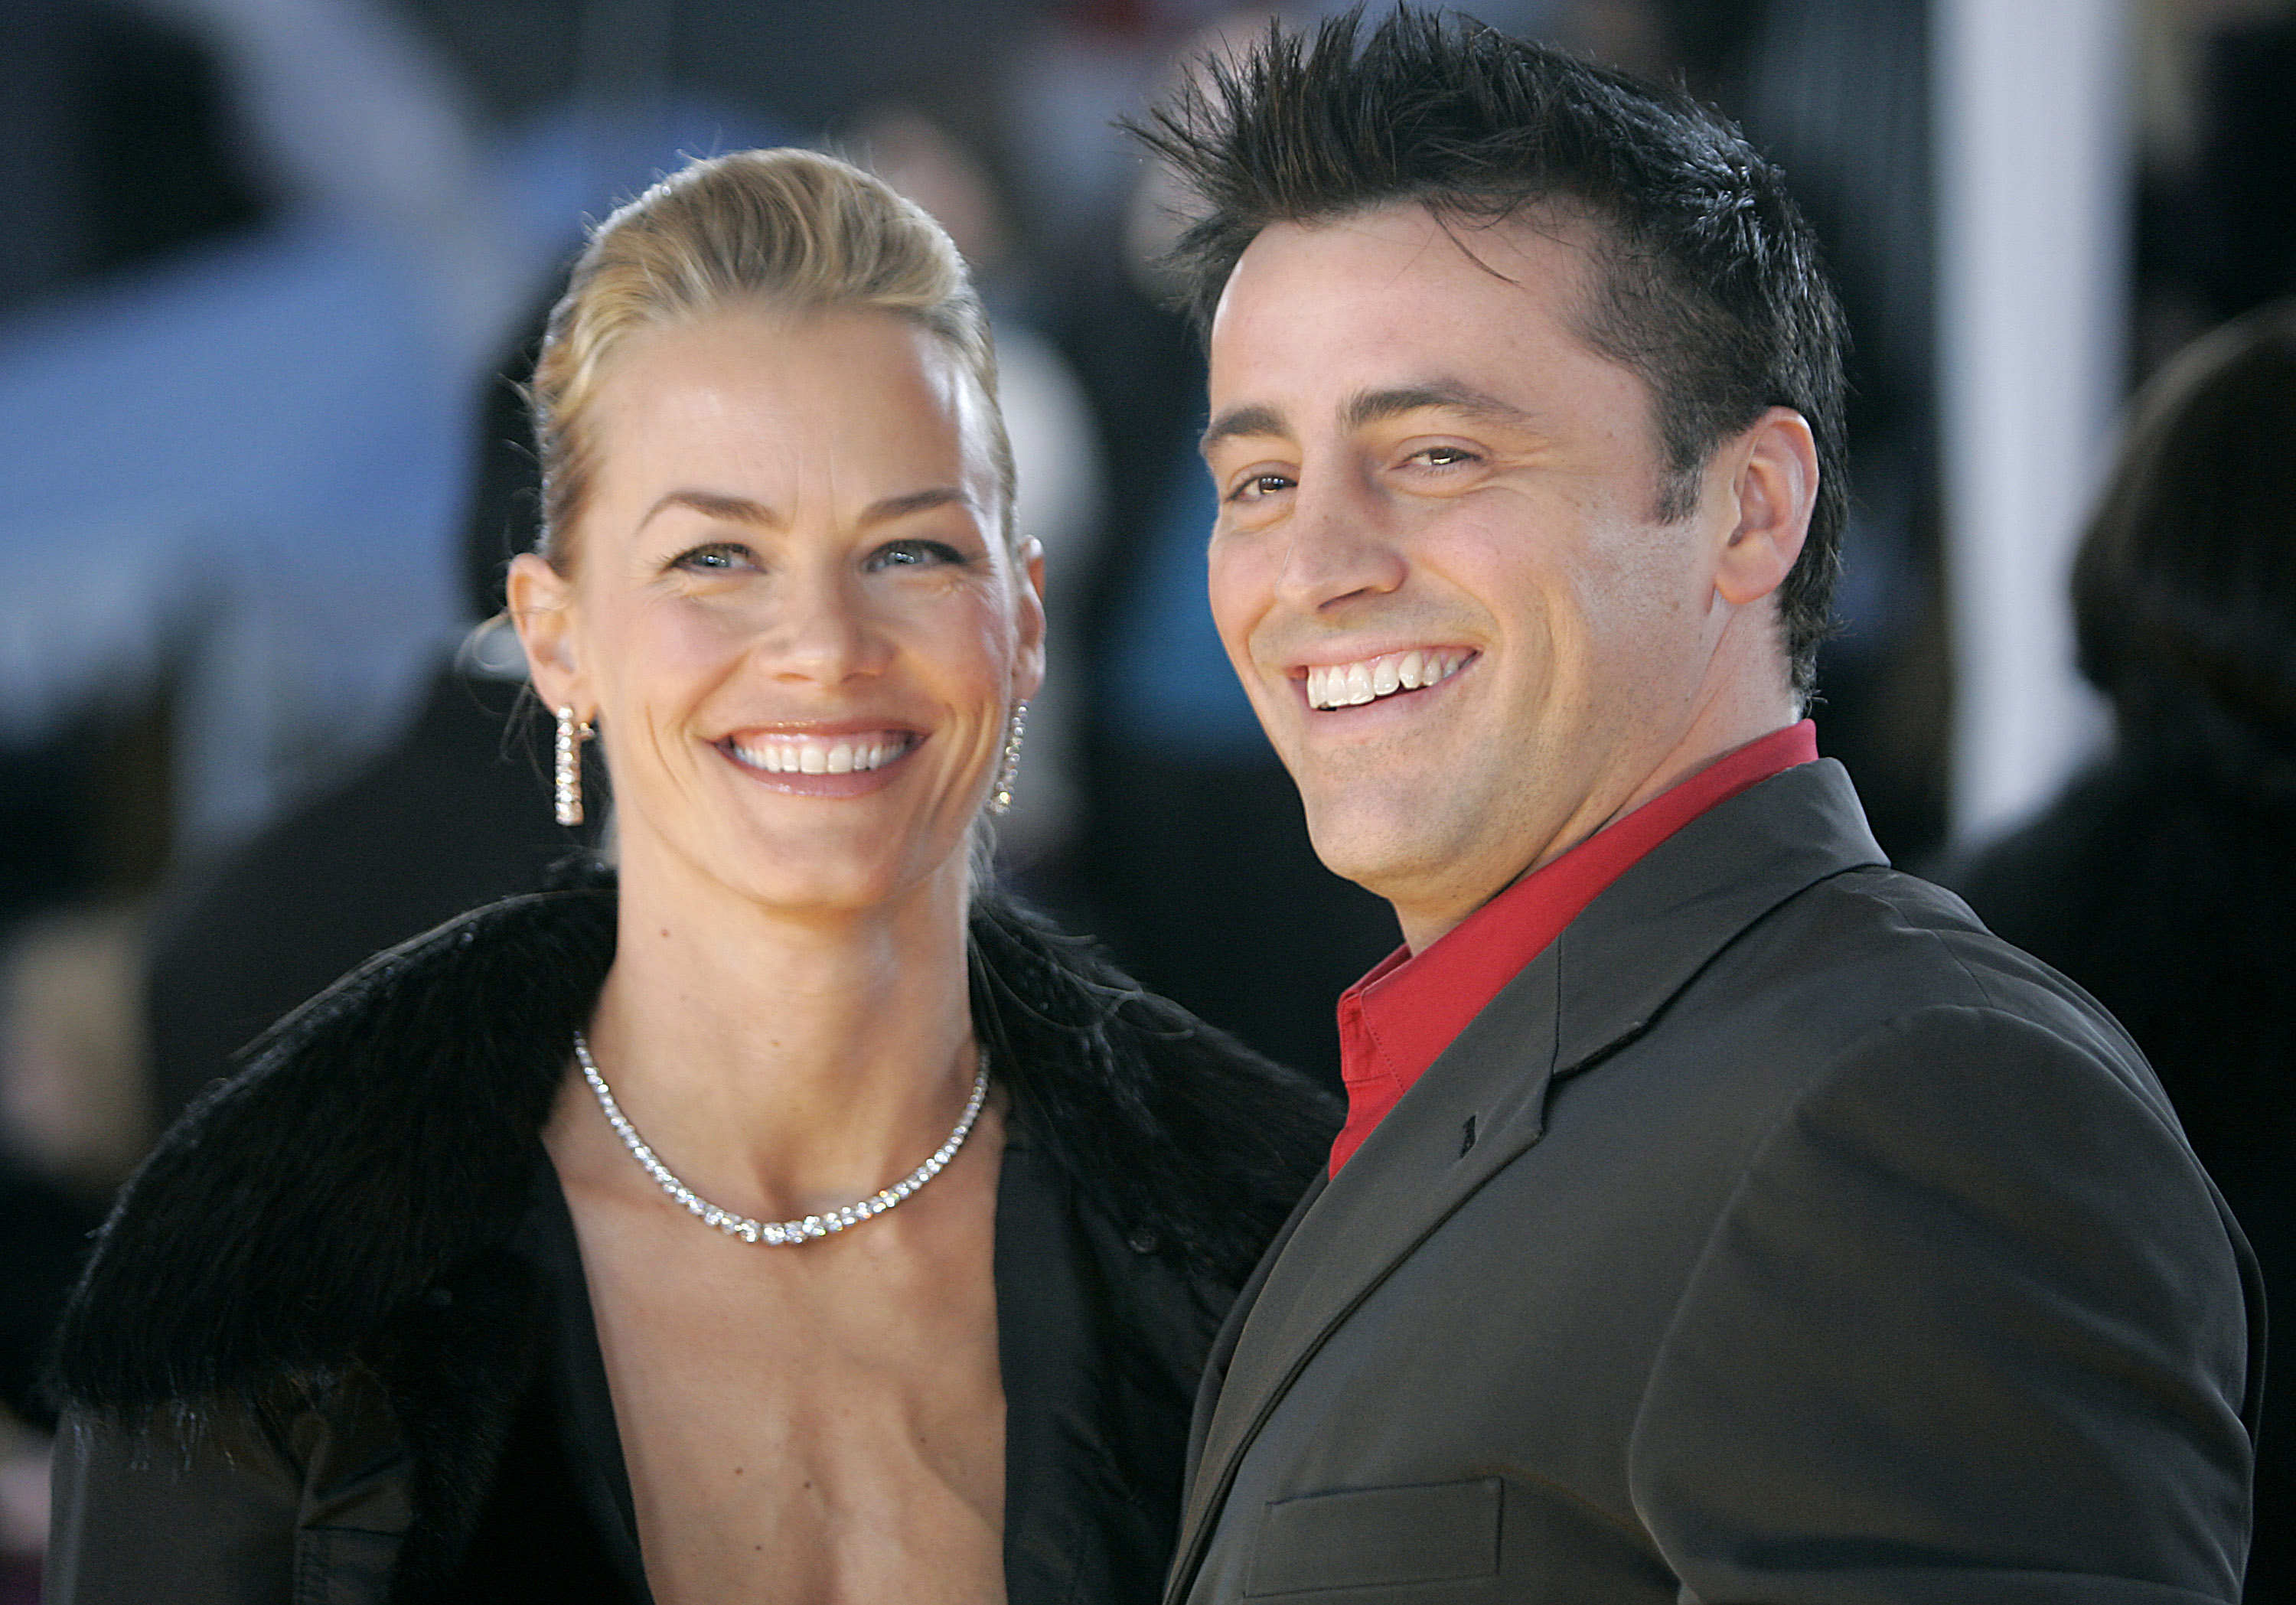 Melissa McKnight and Matt LeBlanc at the People's Choice Awards in California in 2005 | Source: Getty Images